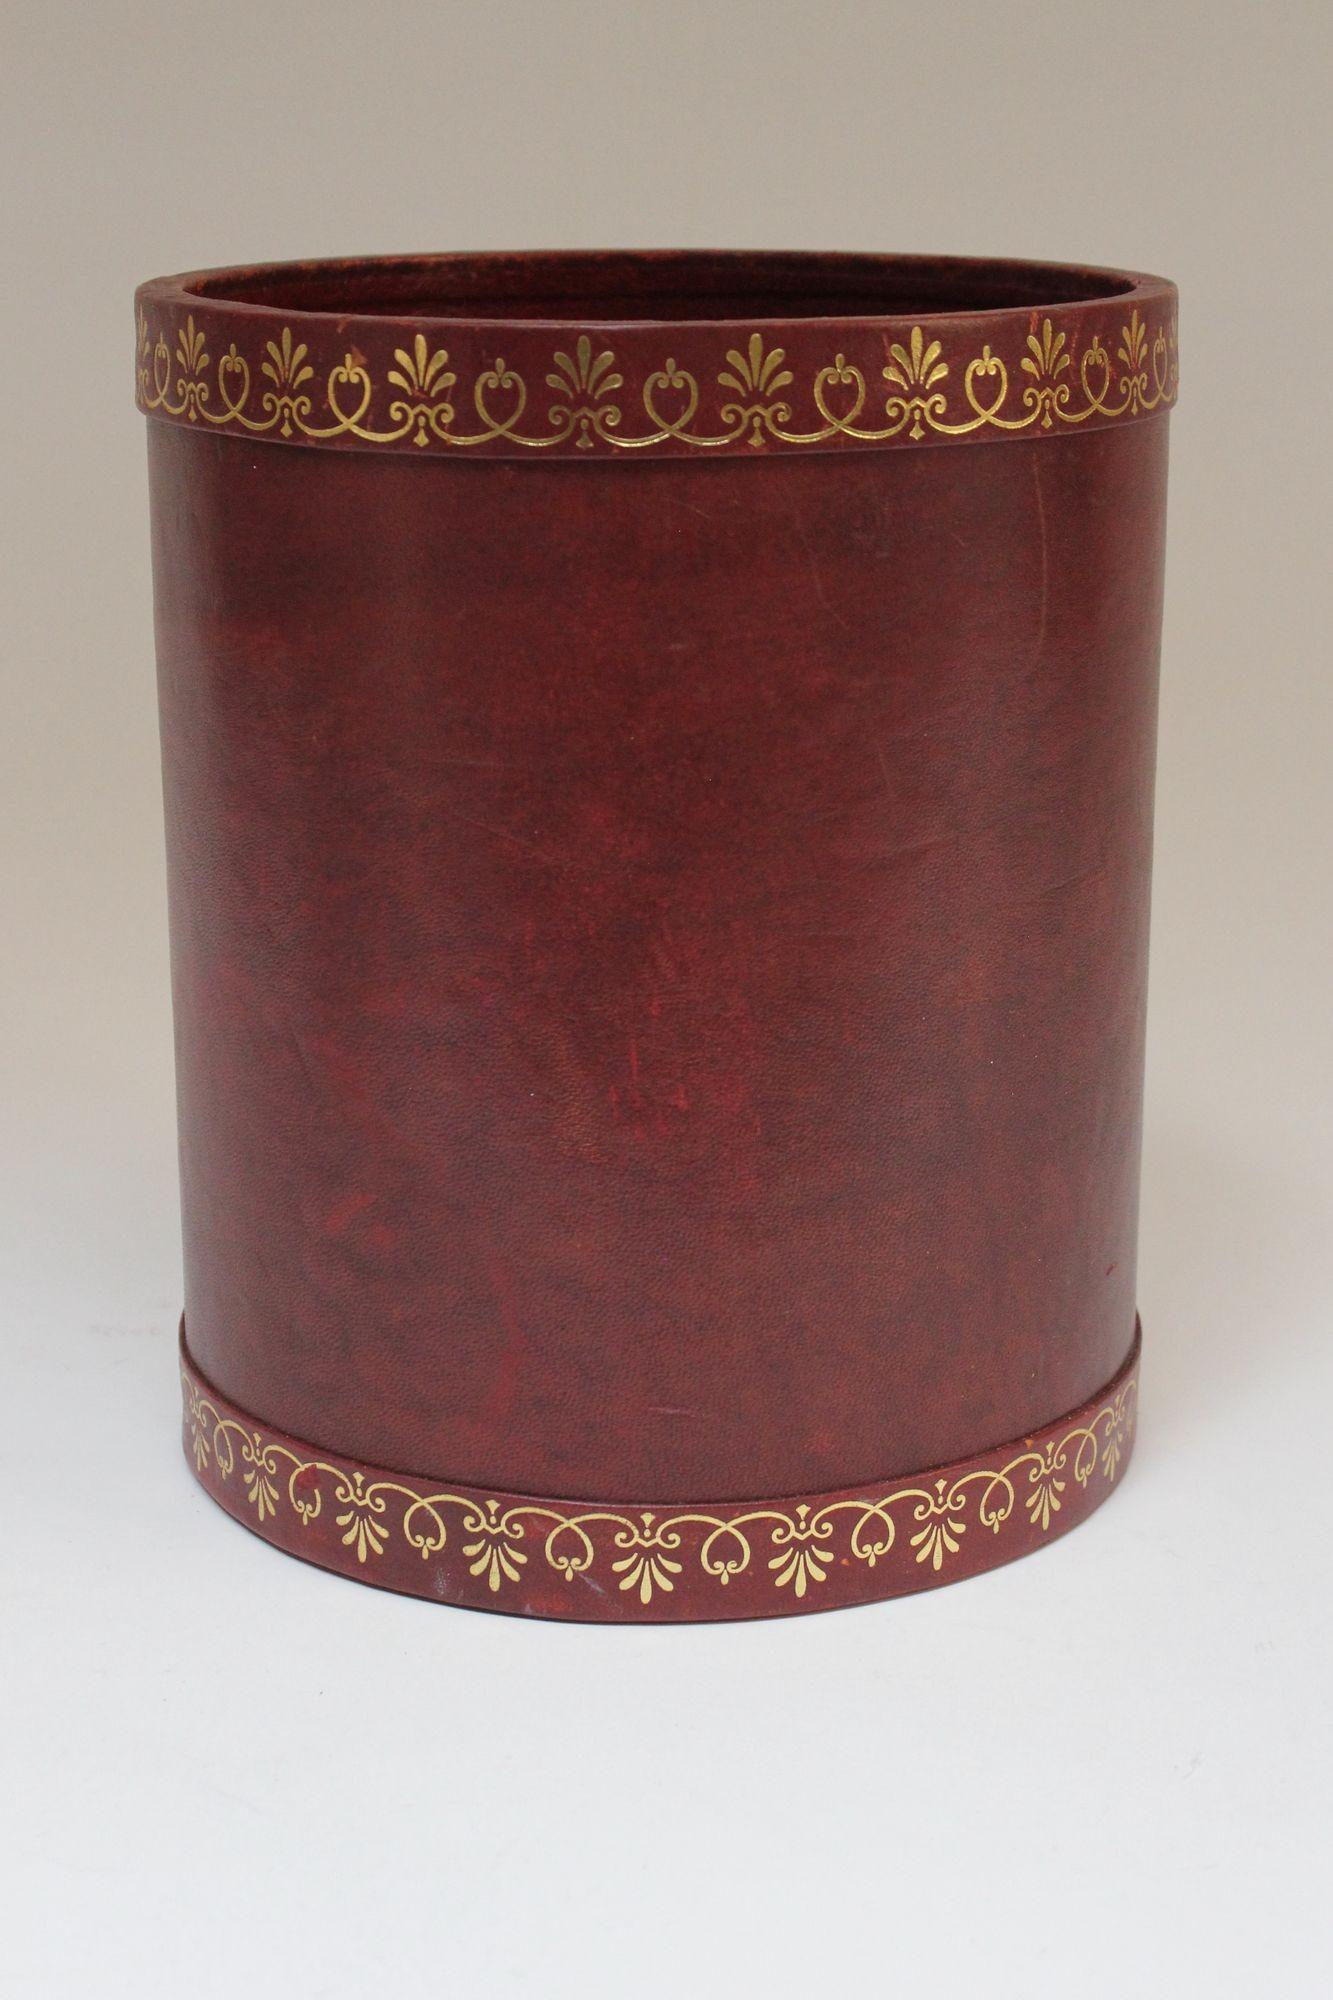 Burgundy leather wastebasket (ca. Mid-Twentieth Century, Italy).
Handsome piece with elegant gold tooled decoration at the top and bottom.
Good, vintage condition with scuffs in a few places, as shown.
H: 11.75